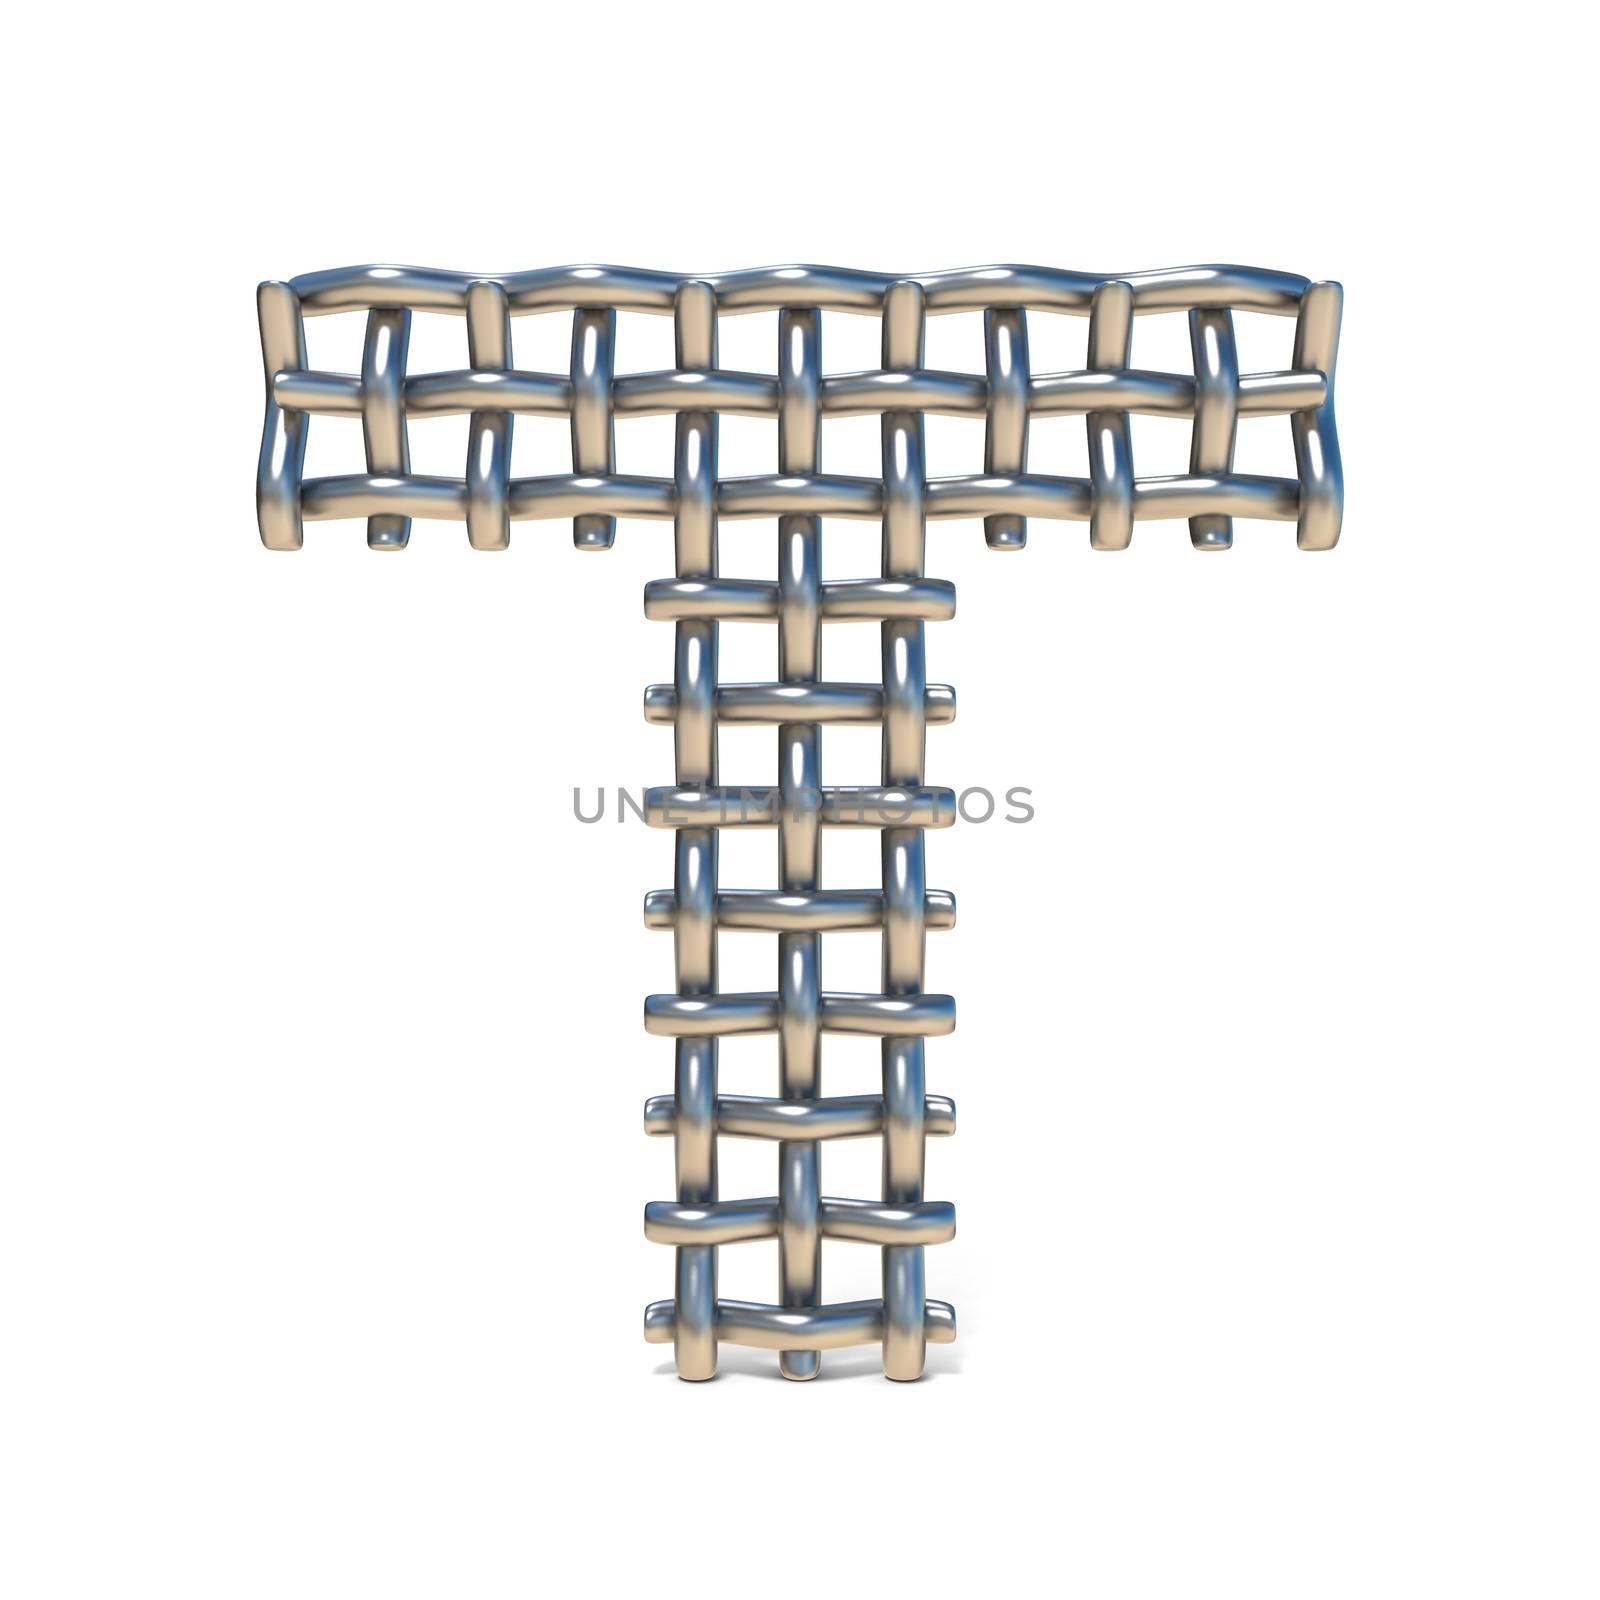 Metal wire mesh font LETTER T 3D render illustration isolated on white background